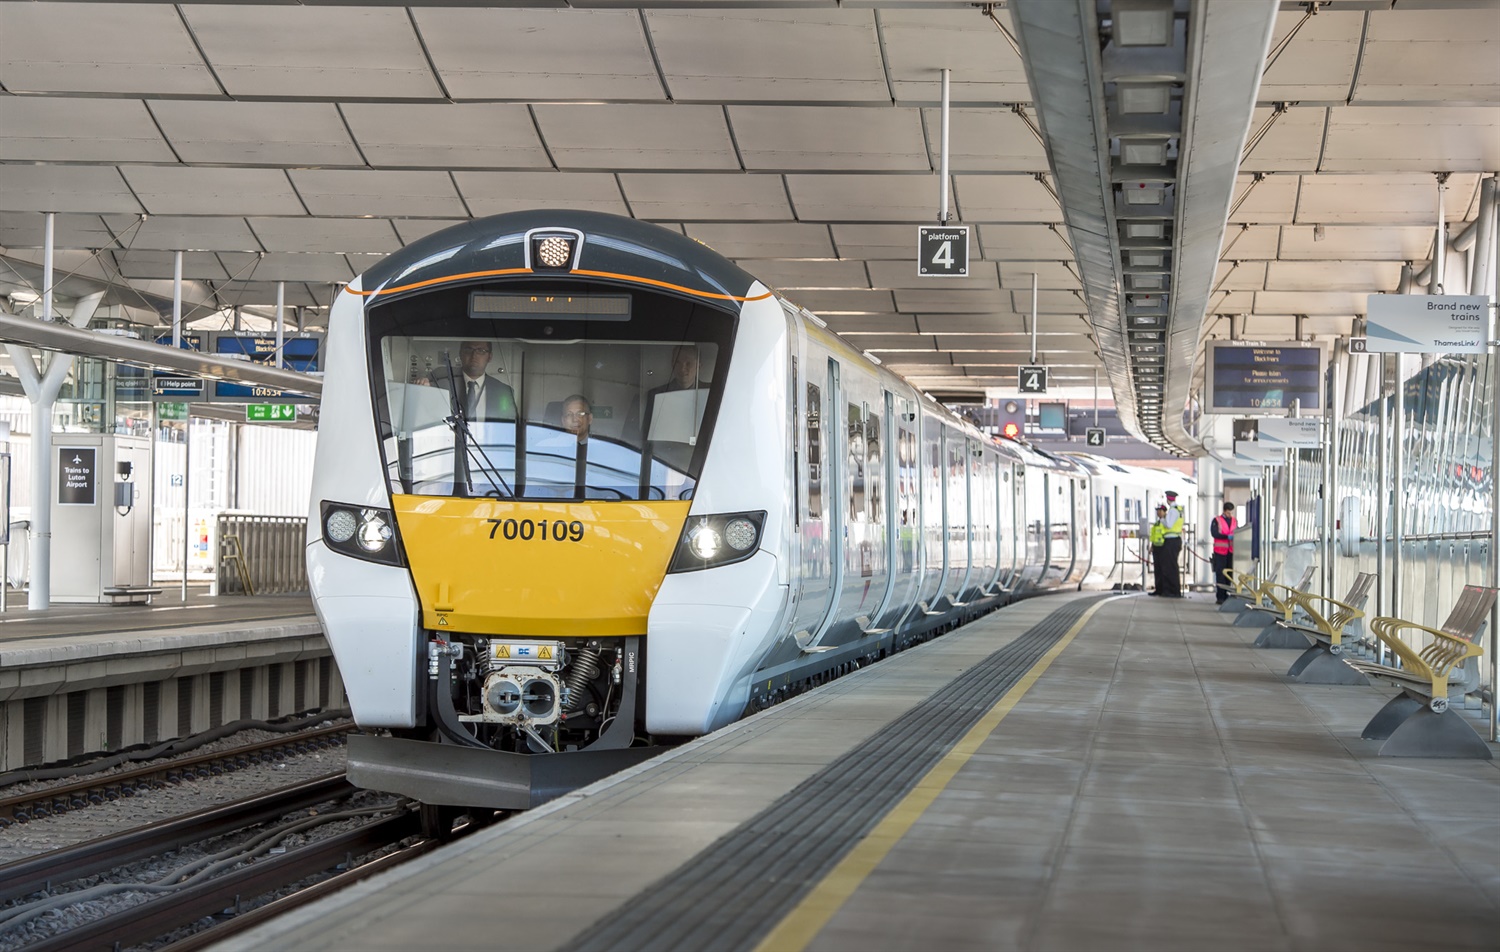 GTR seeks views on ‘complete redesign’ of 2018 timetable with self-contained routes